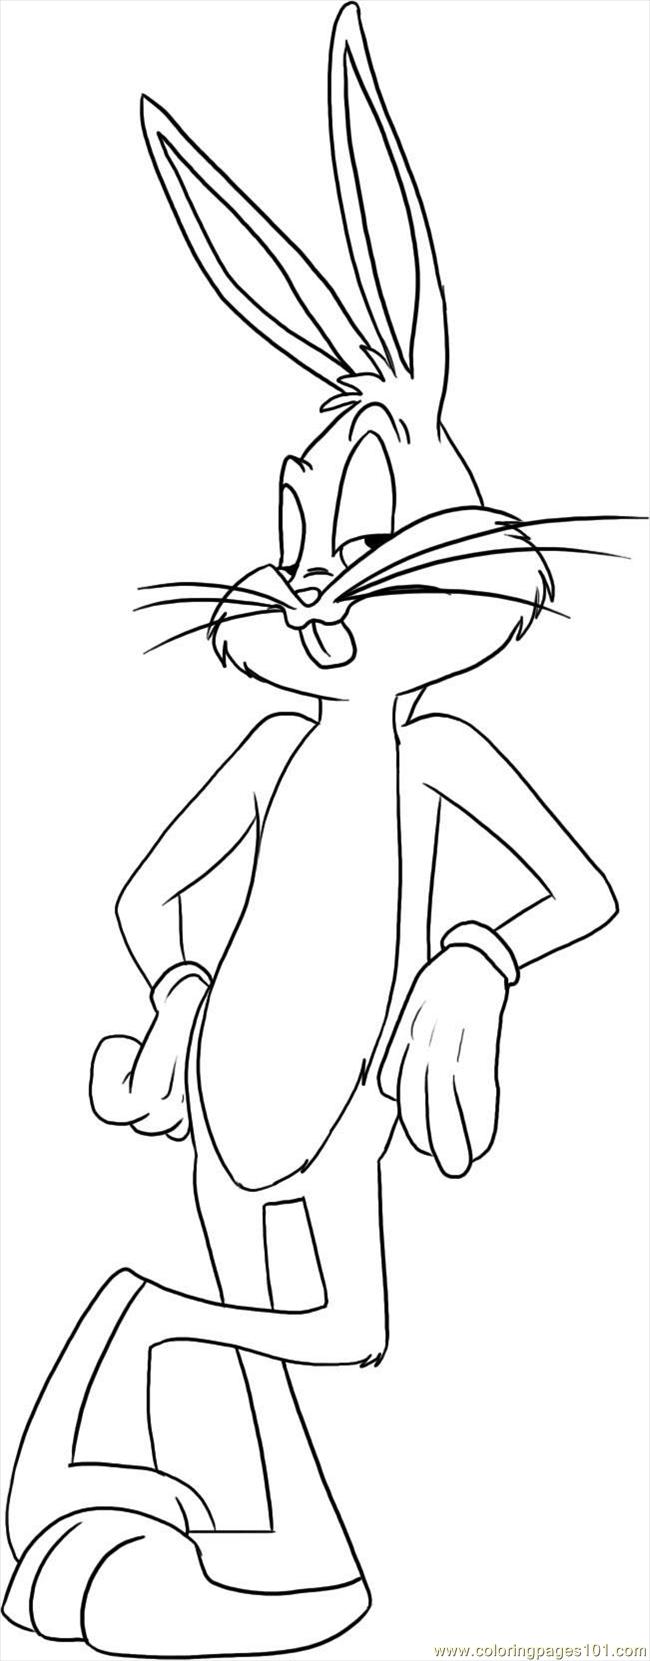 Coloring Pages Bugs Bunny Step 5 Cartoons Bugs Bunny Free 